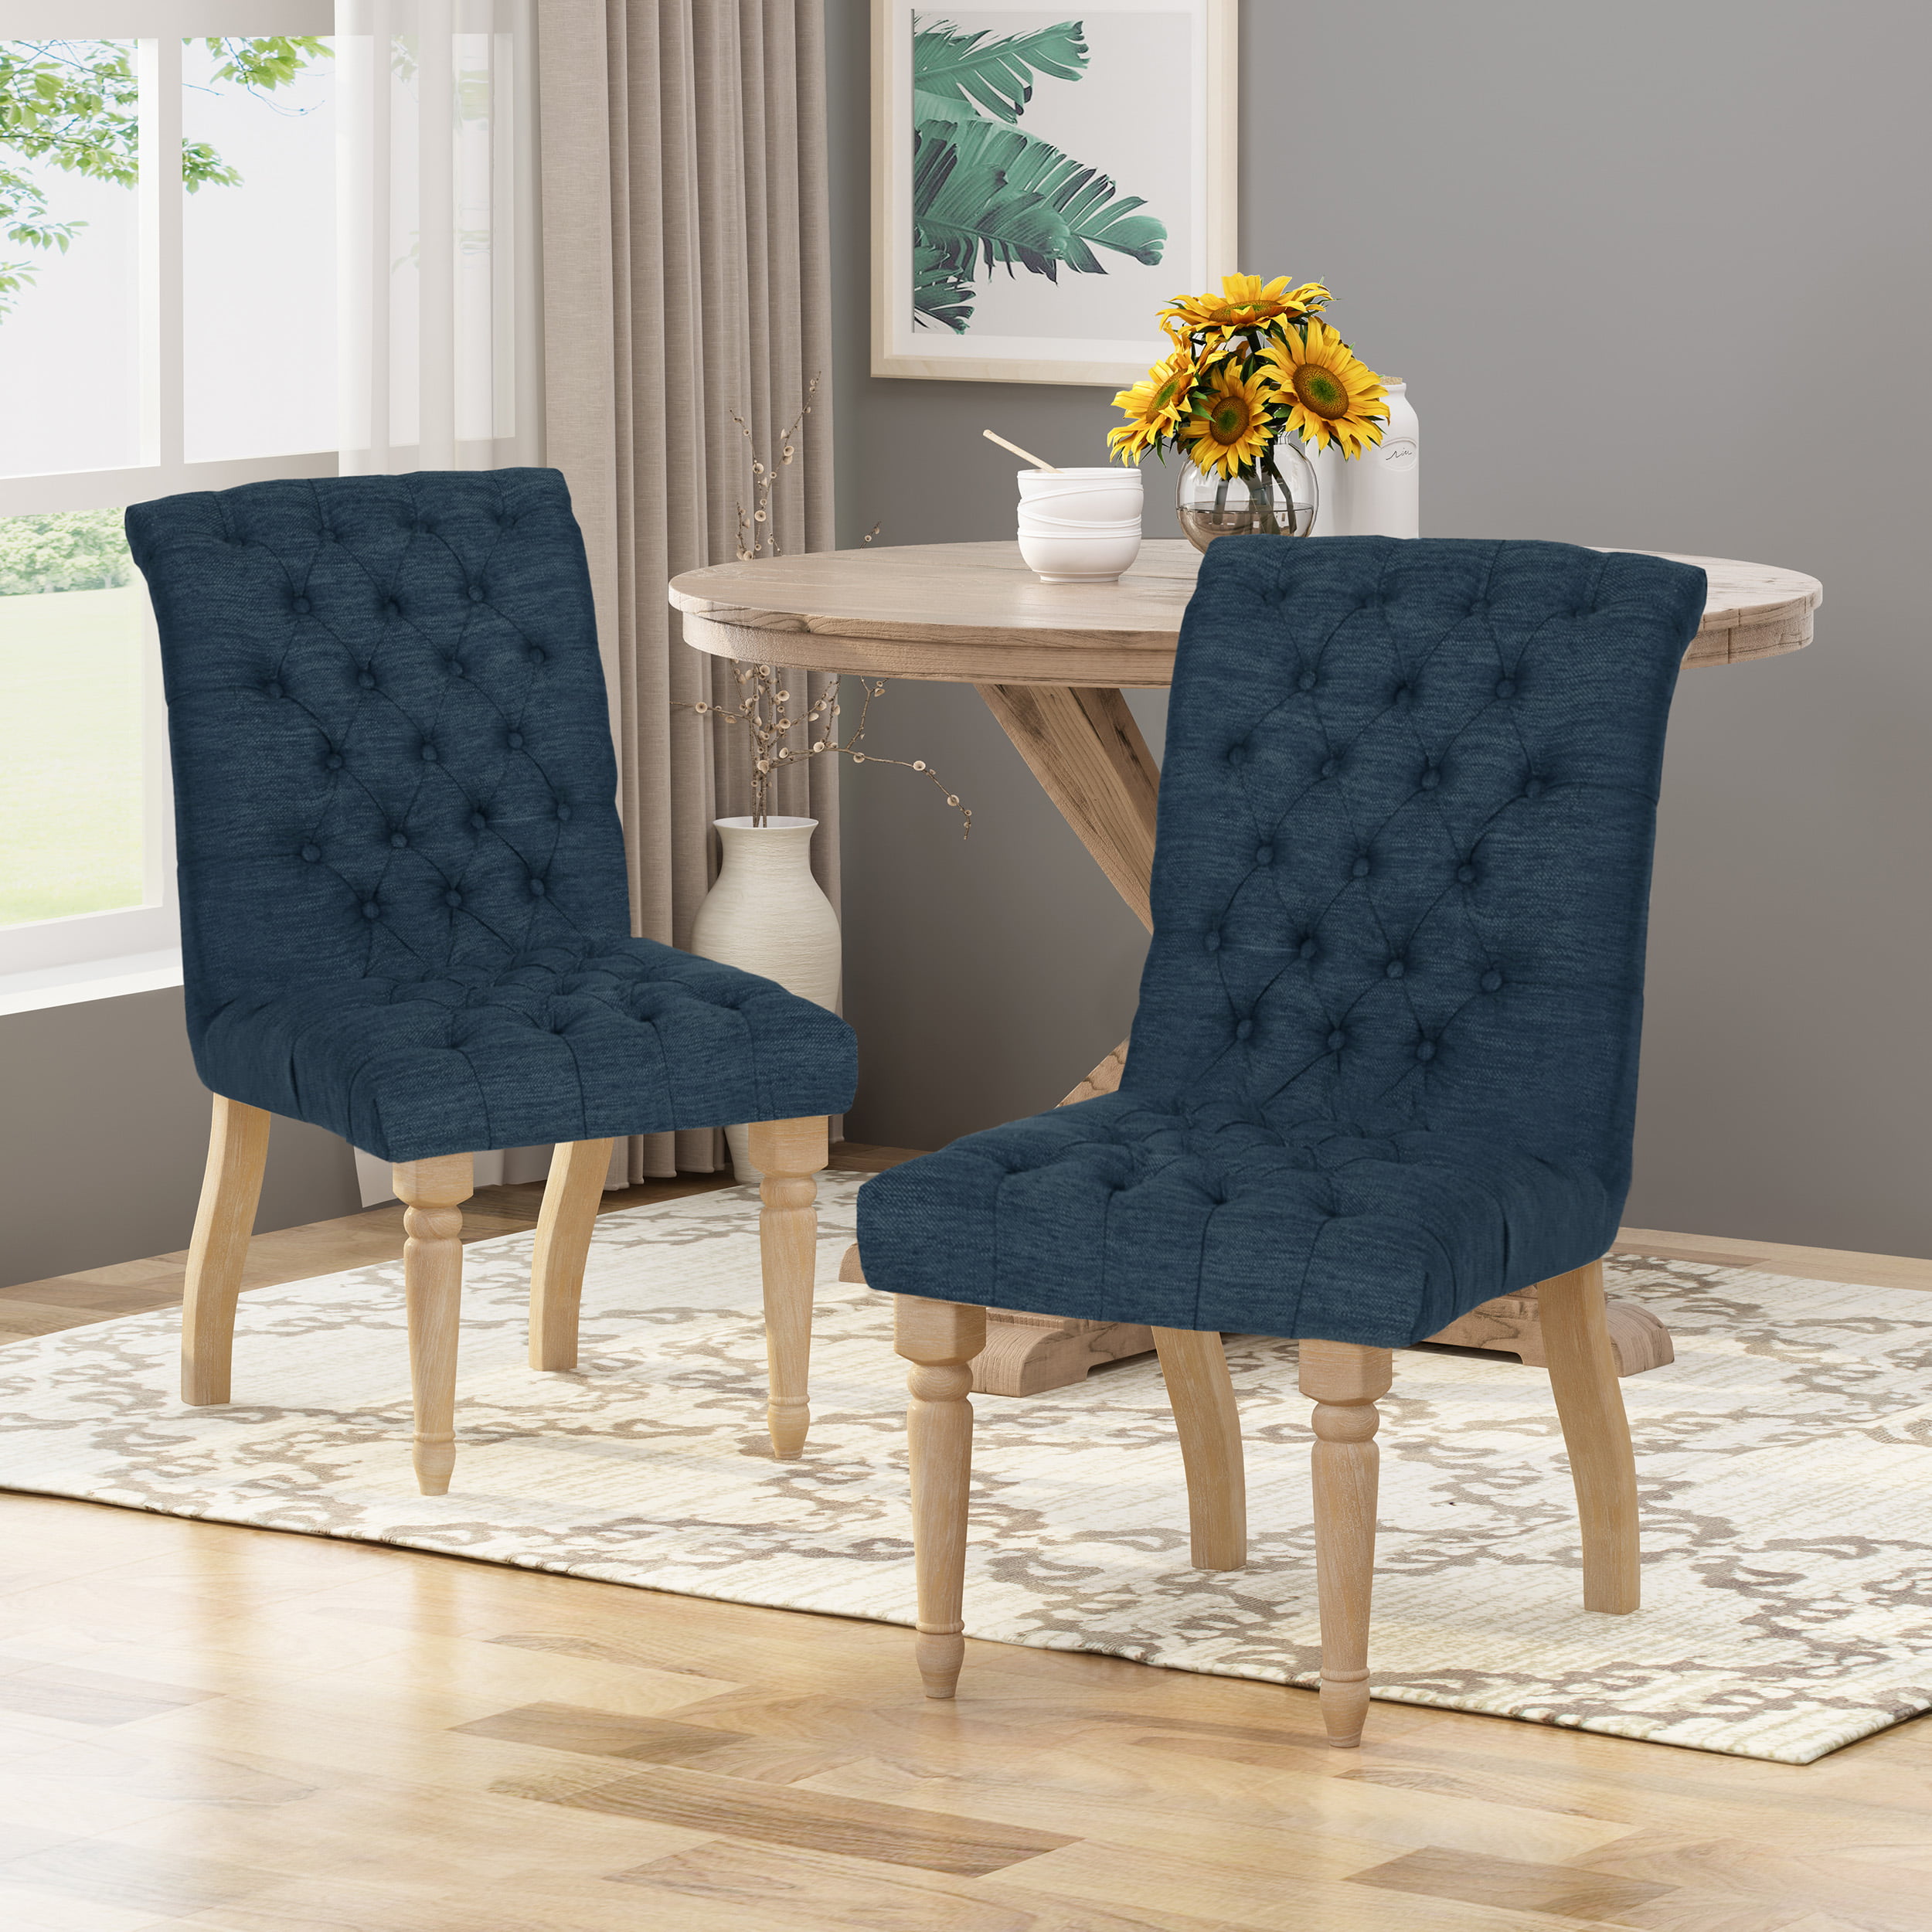 Terrance Tufted Fabric Dining Chair (Set of 2), Navy Blue and Natural ...